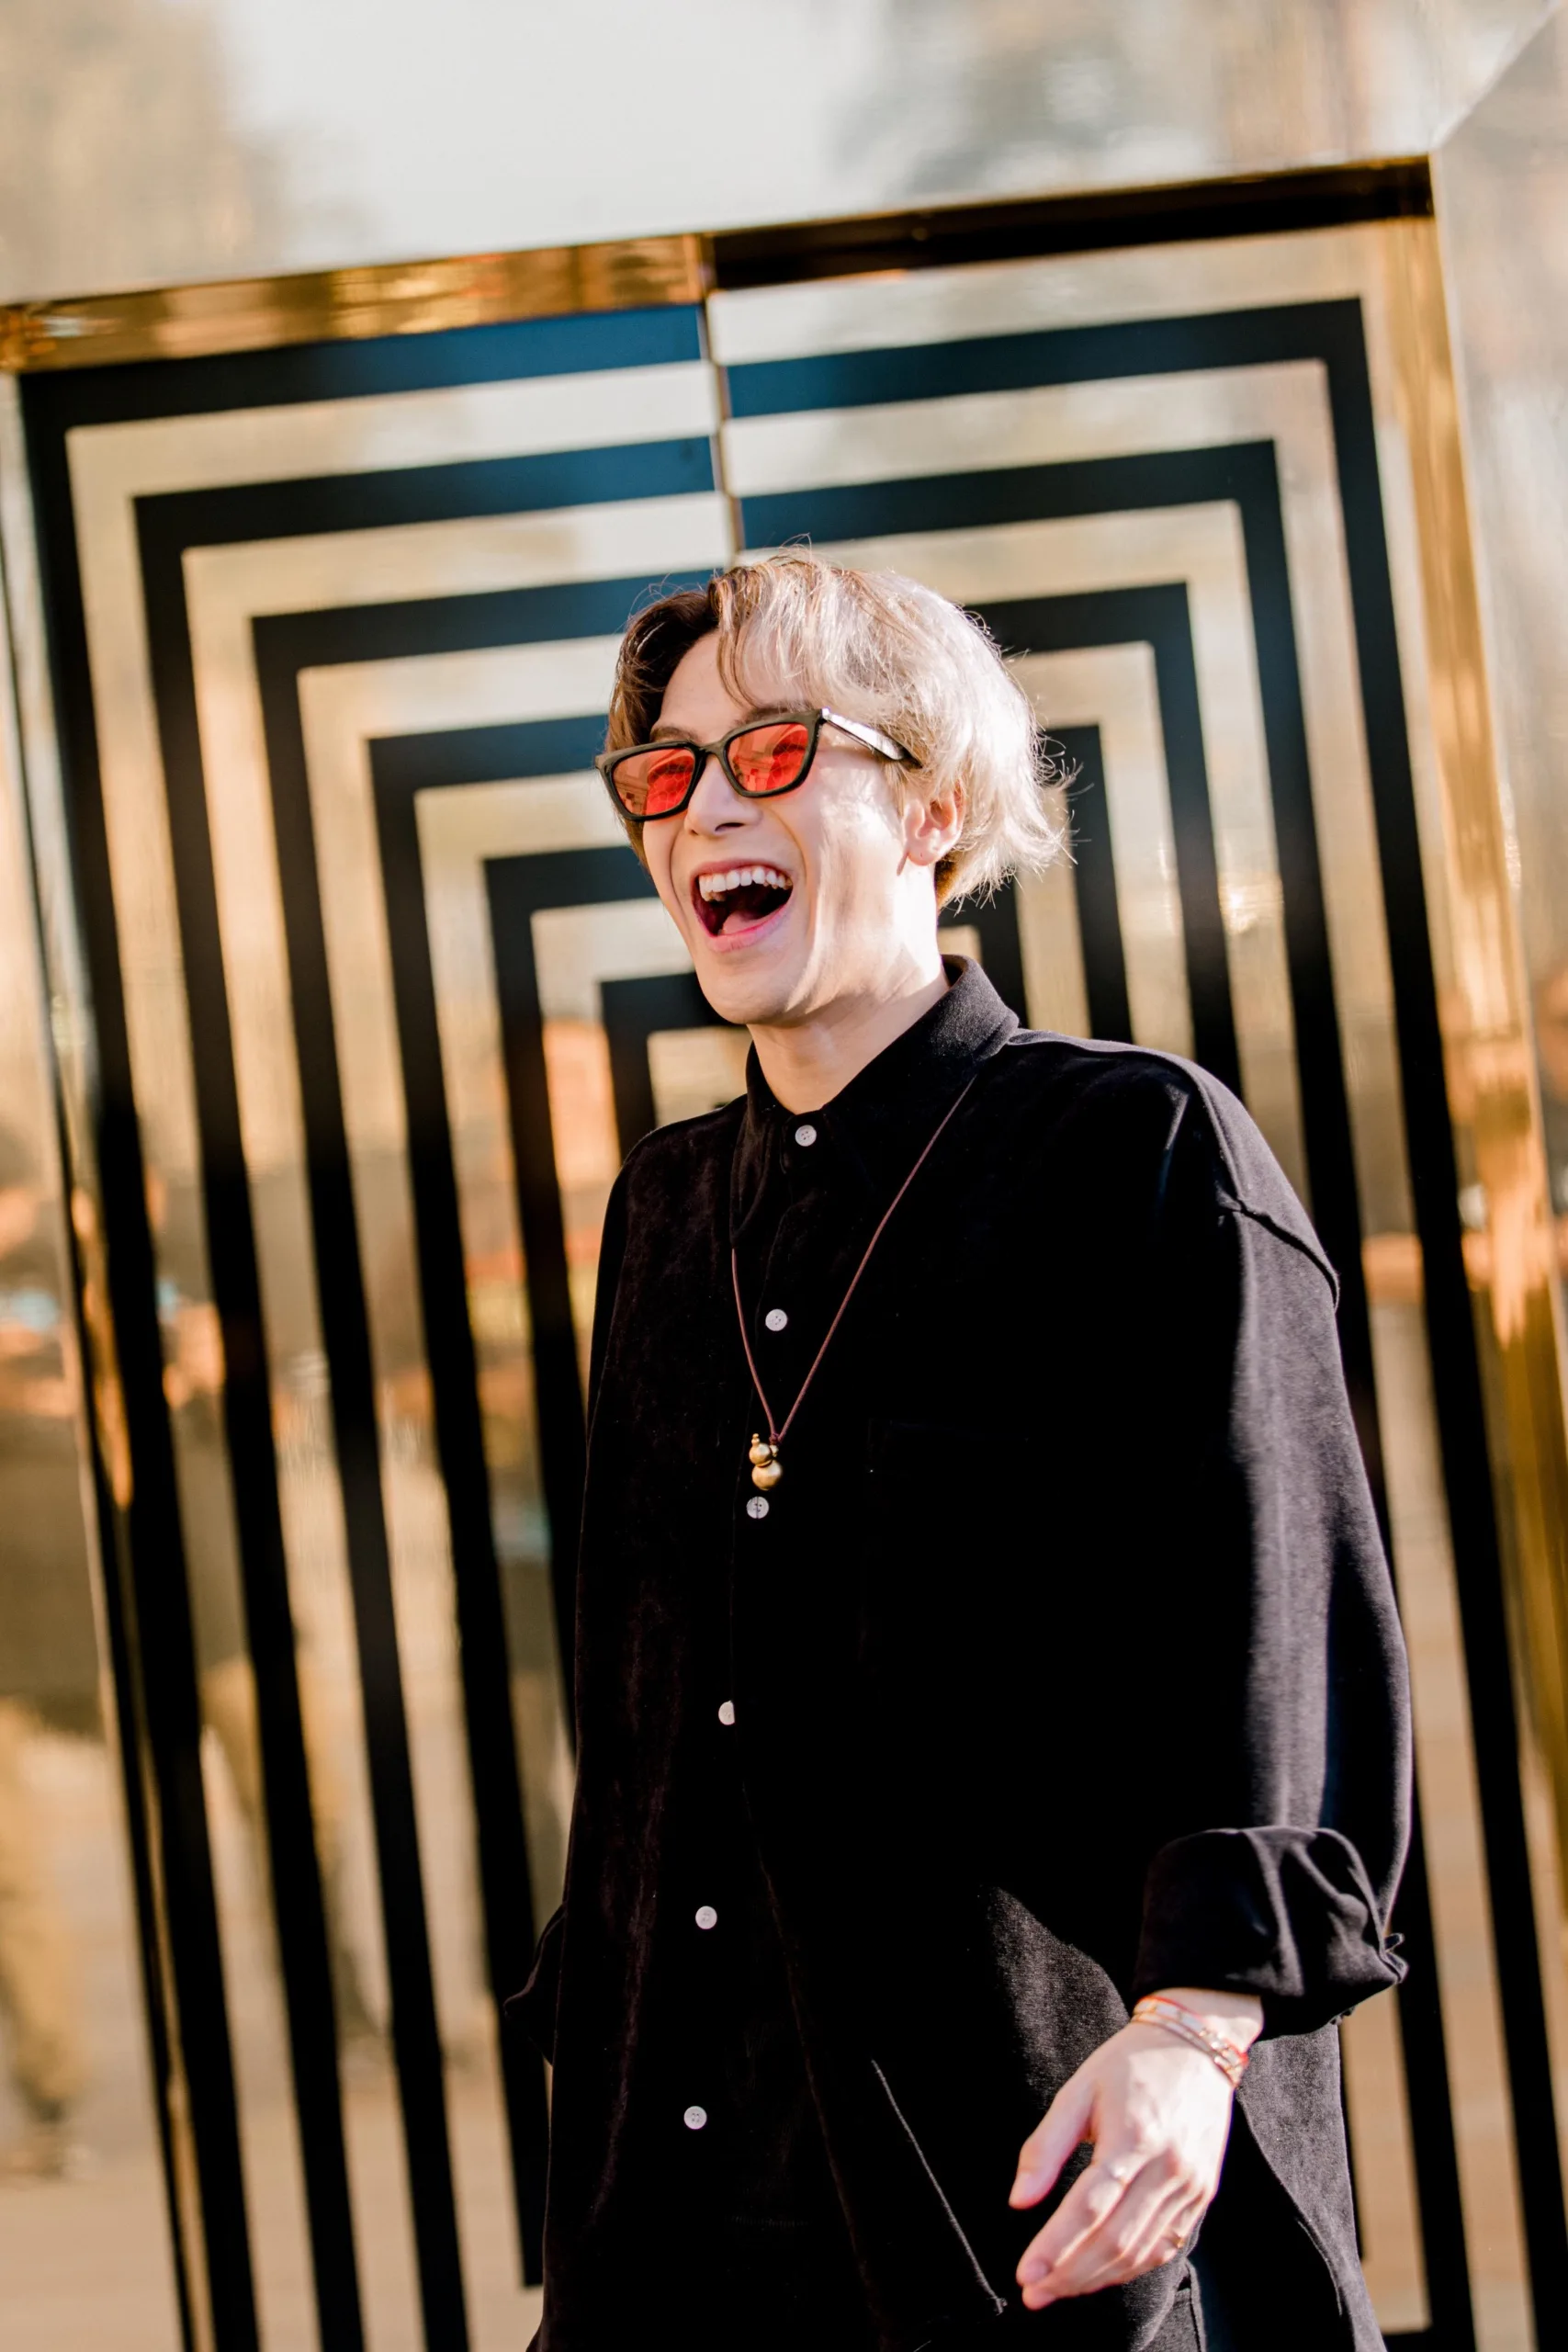 Jackson Wang pictured in a black shirt and glasses with colored lenses as he smiles in front of a shiny gold and black patterned background.